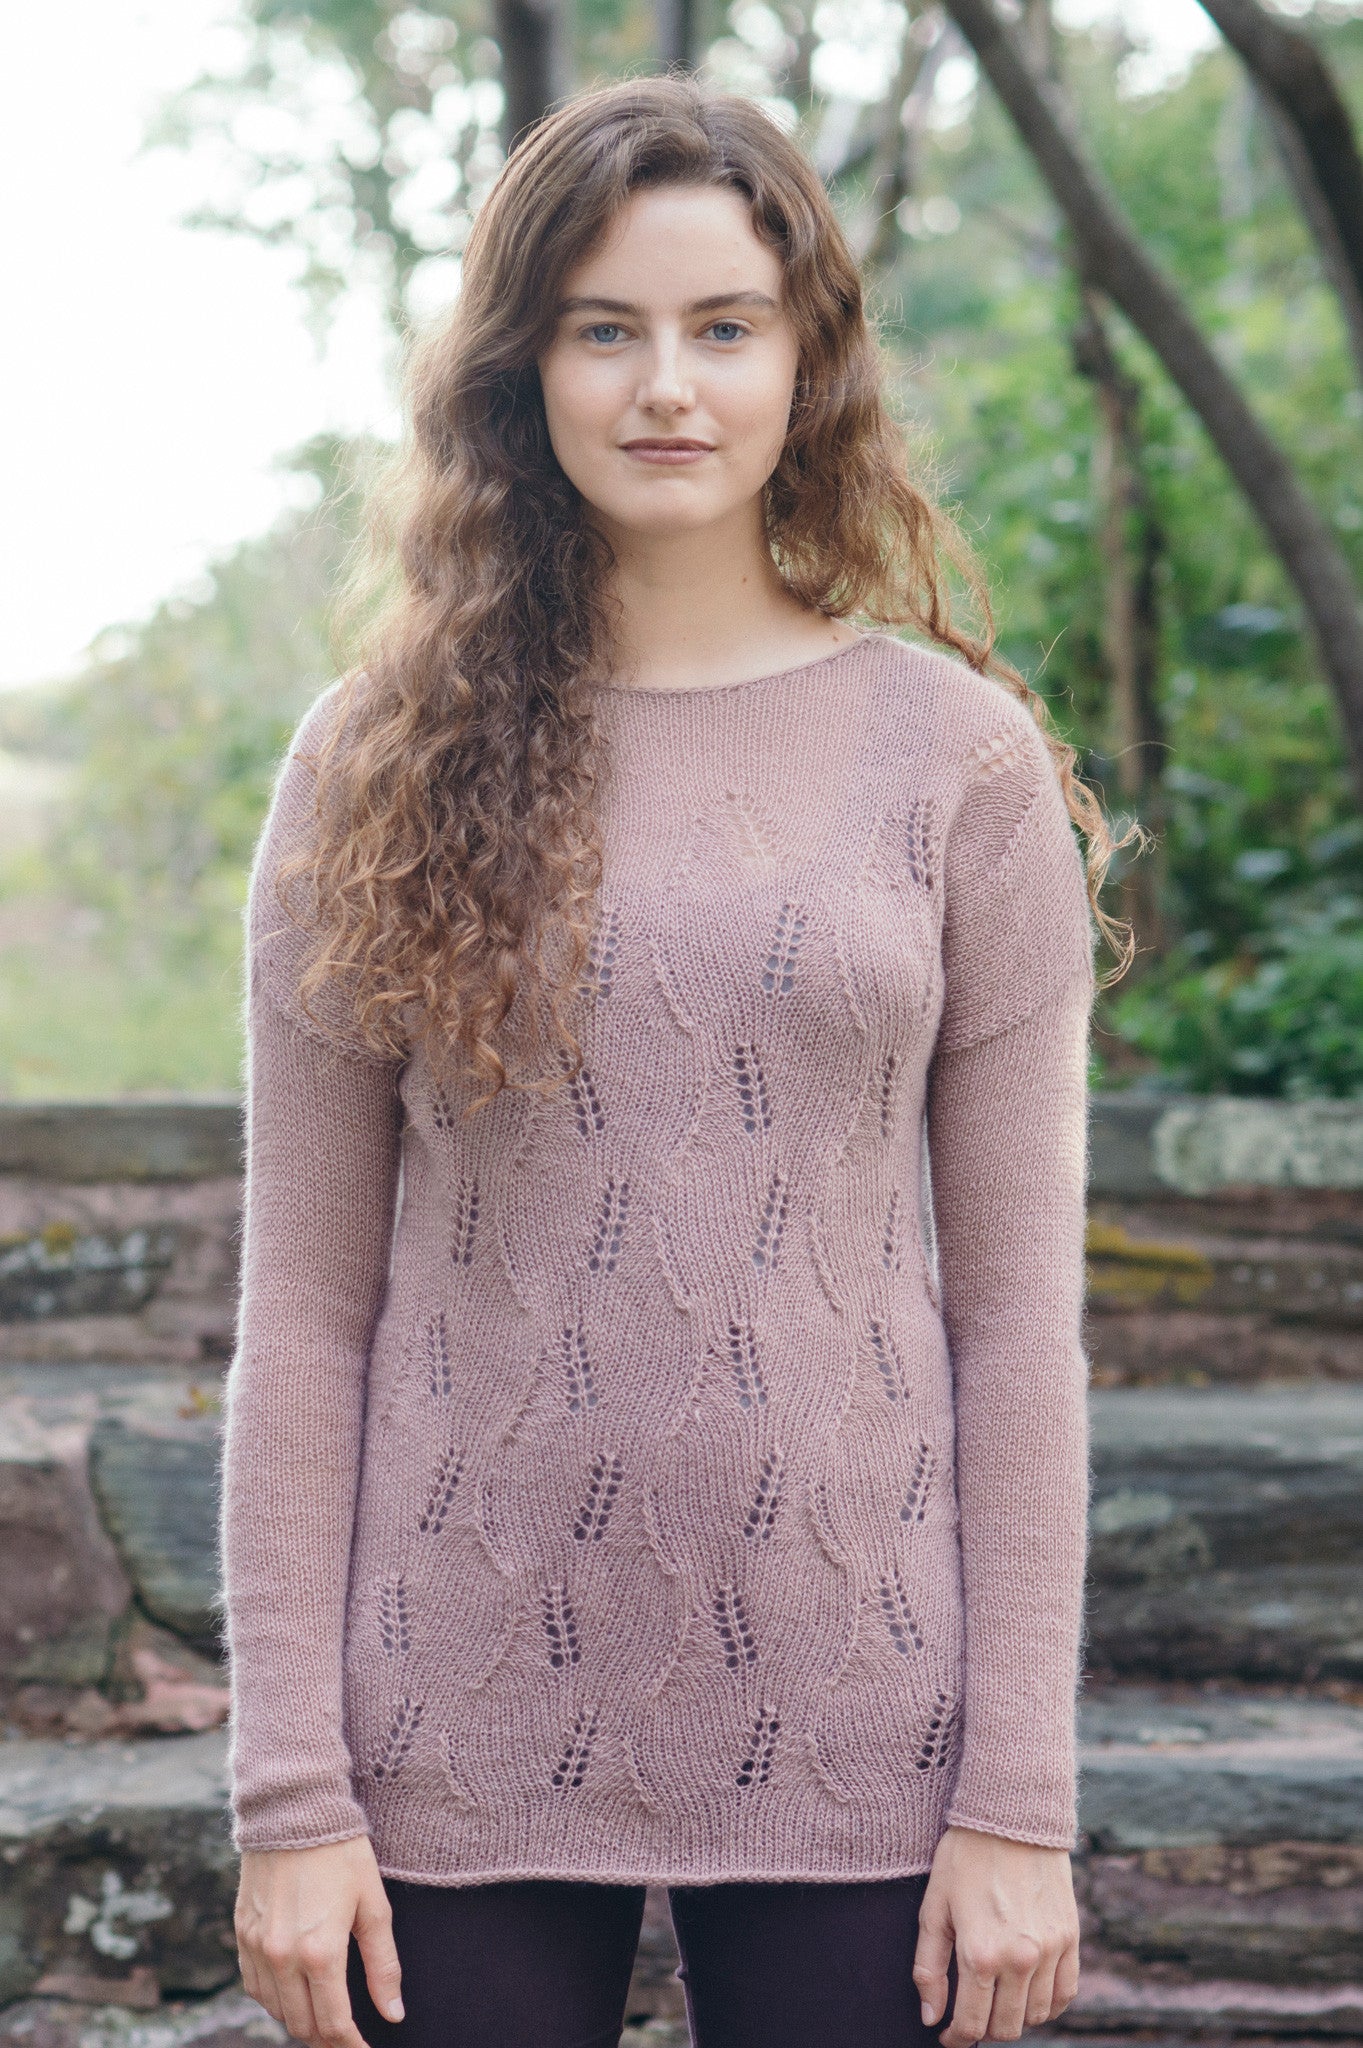 delta pullover knitting pattern – Quince & Co.